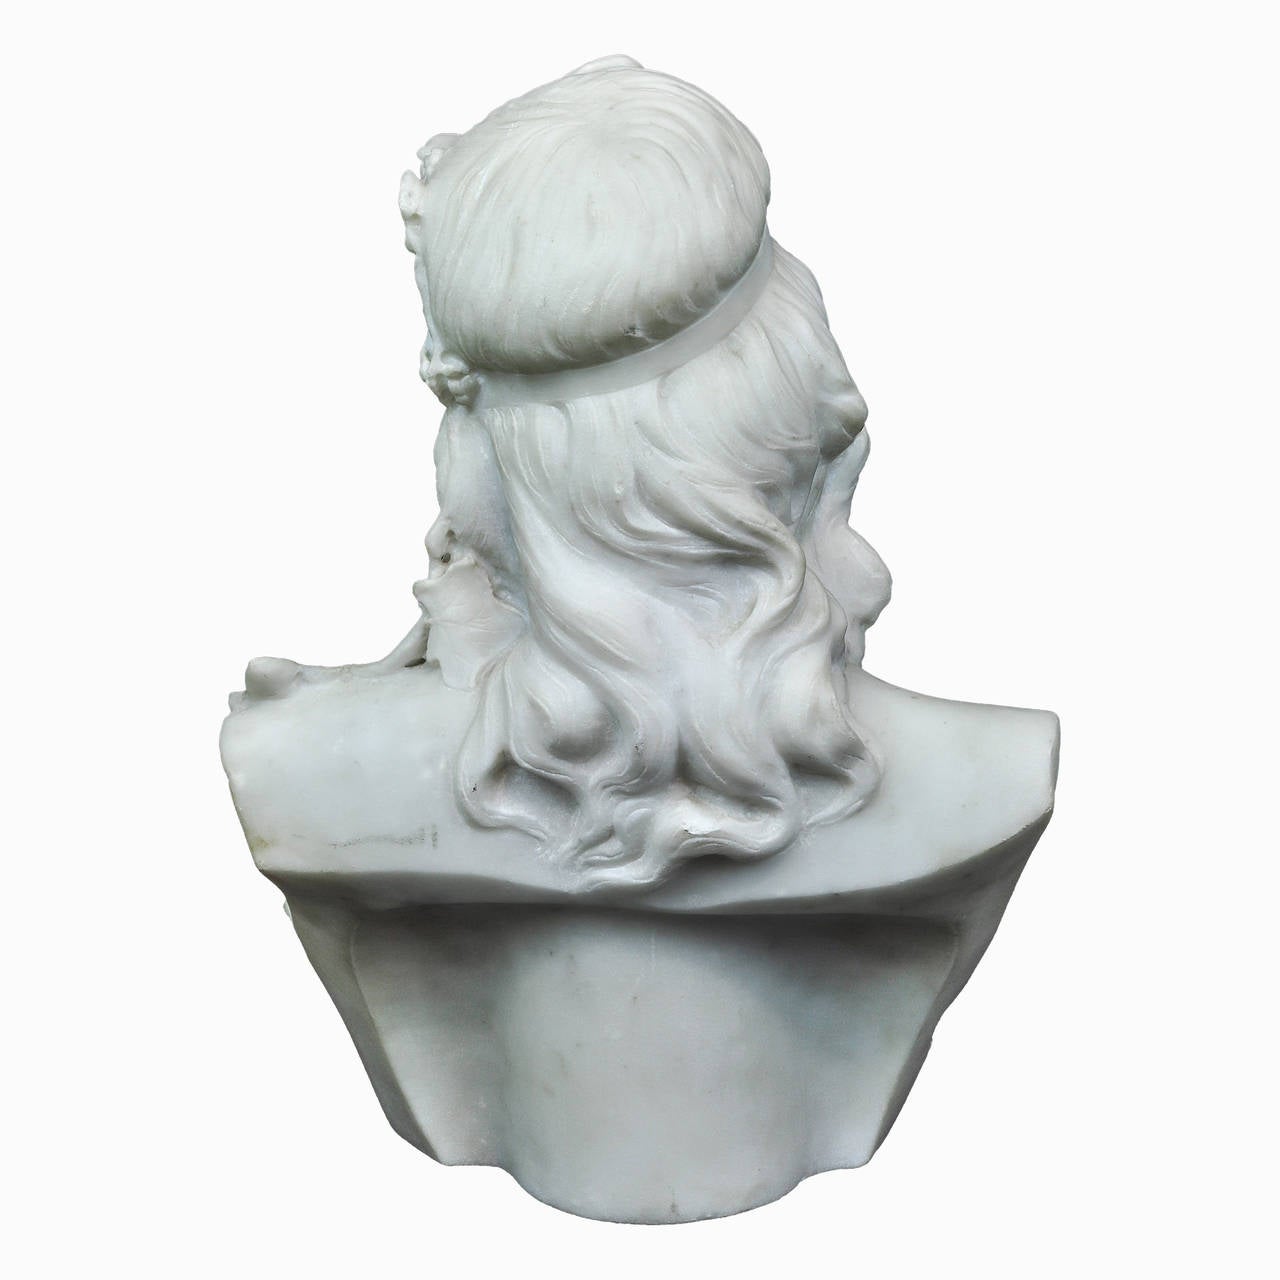 An Italian marble bust of a woman
Stock number: SC59.